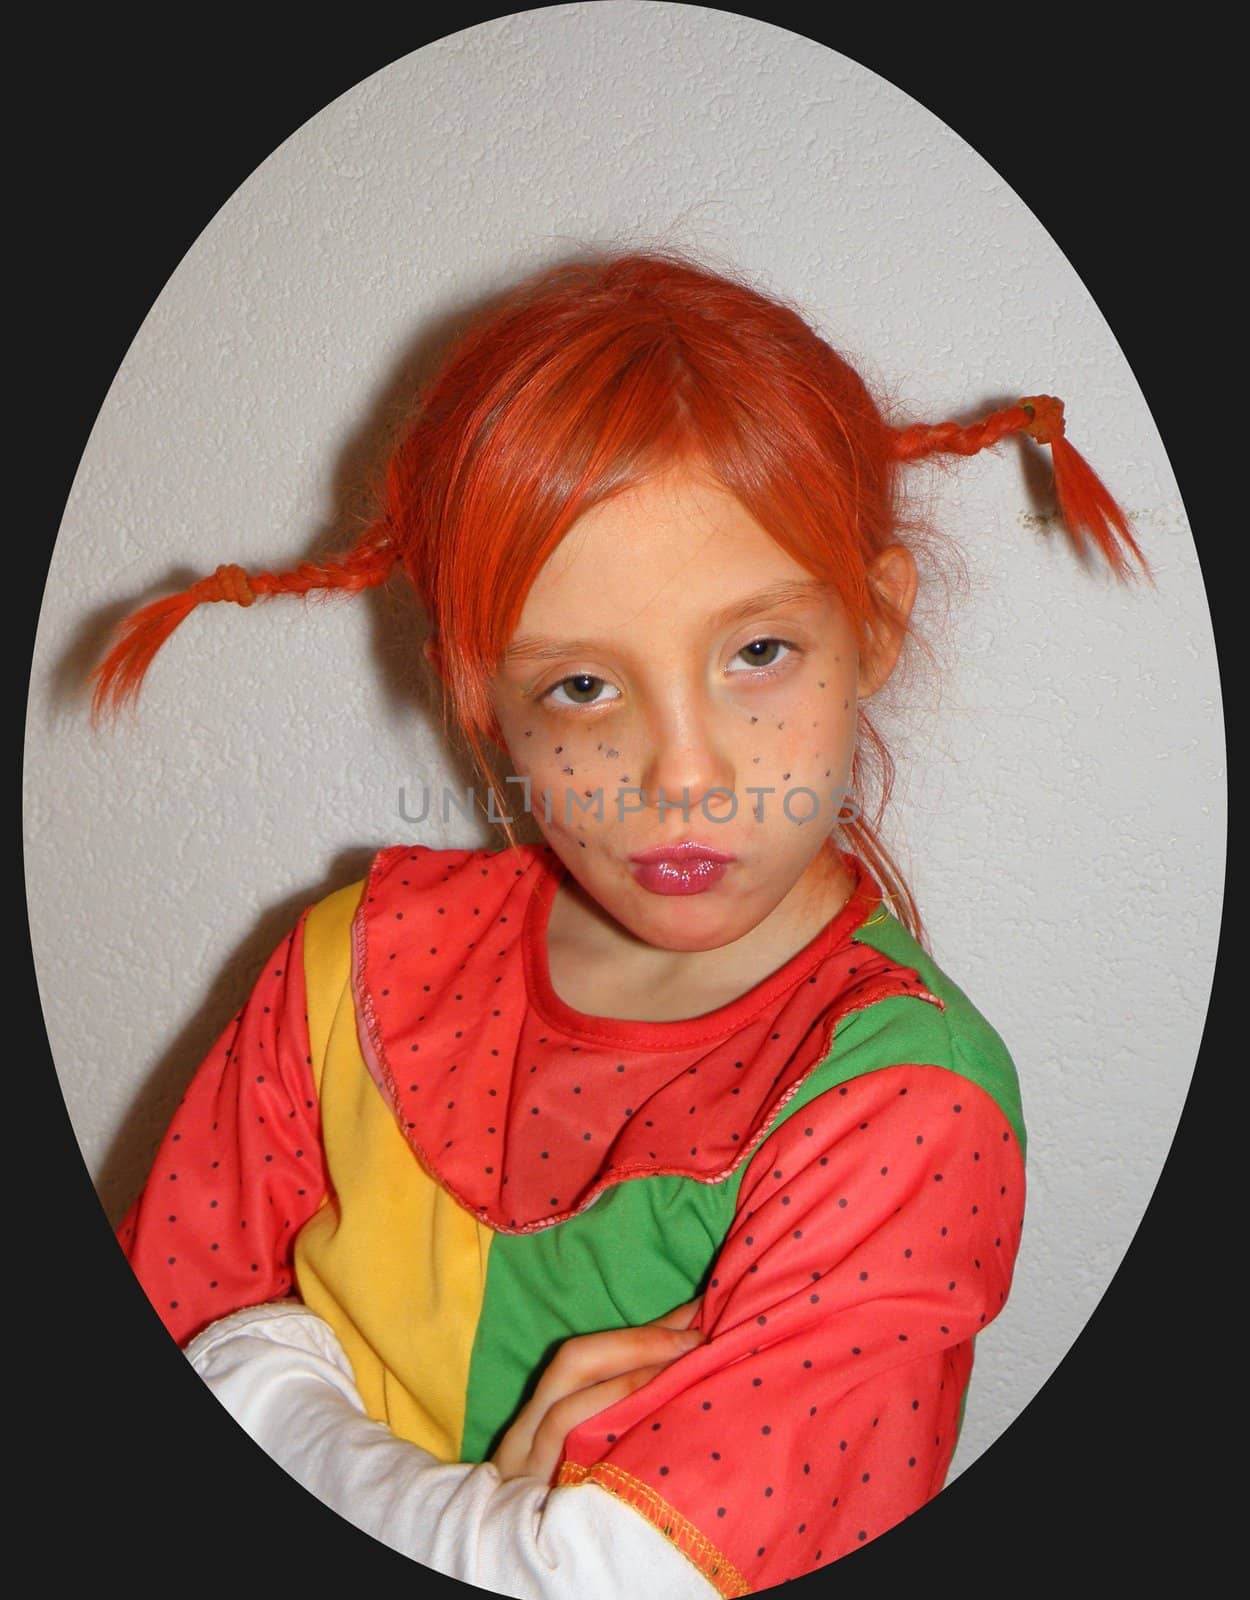 Photo of a girl to the children's Carnival, disguised as Pipi Longstocking.